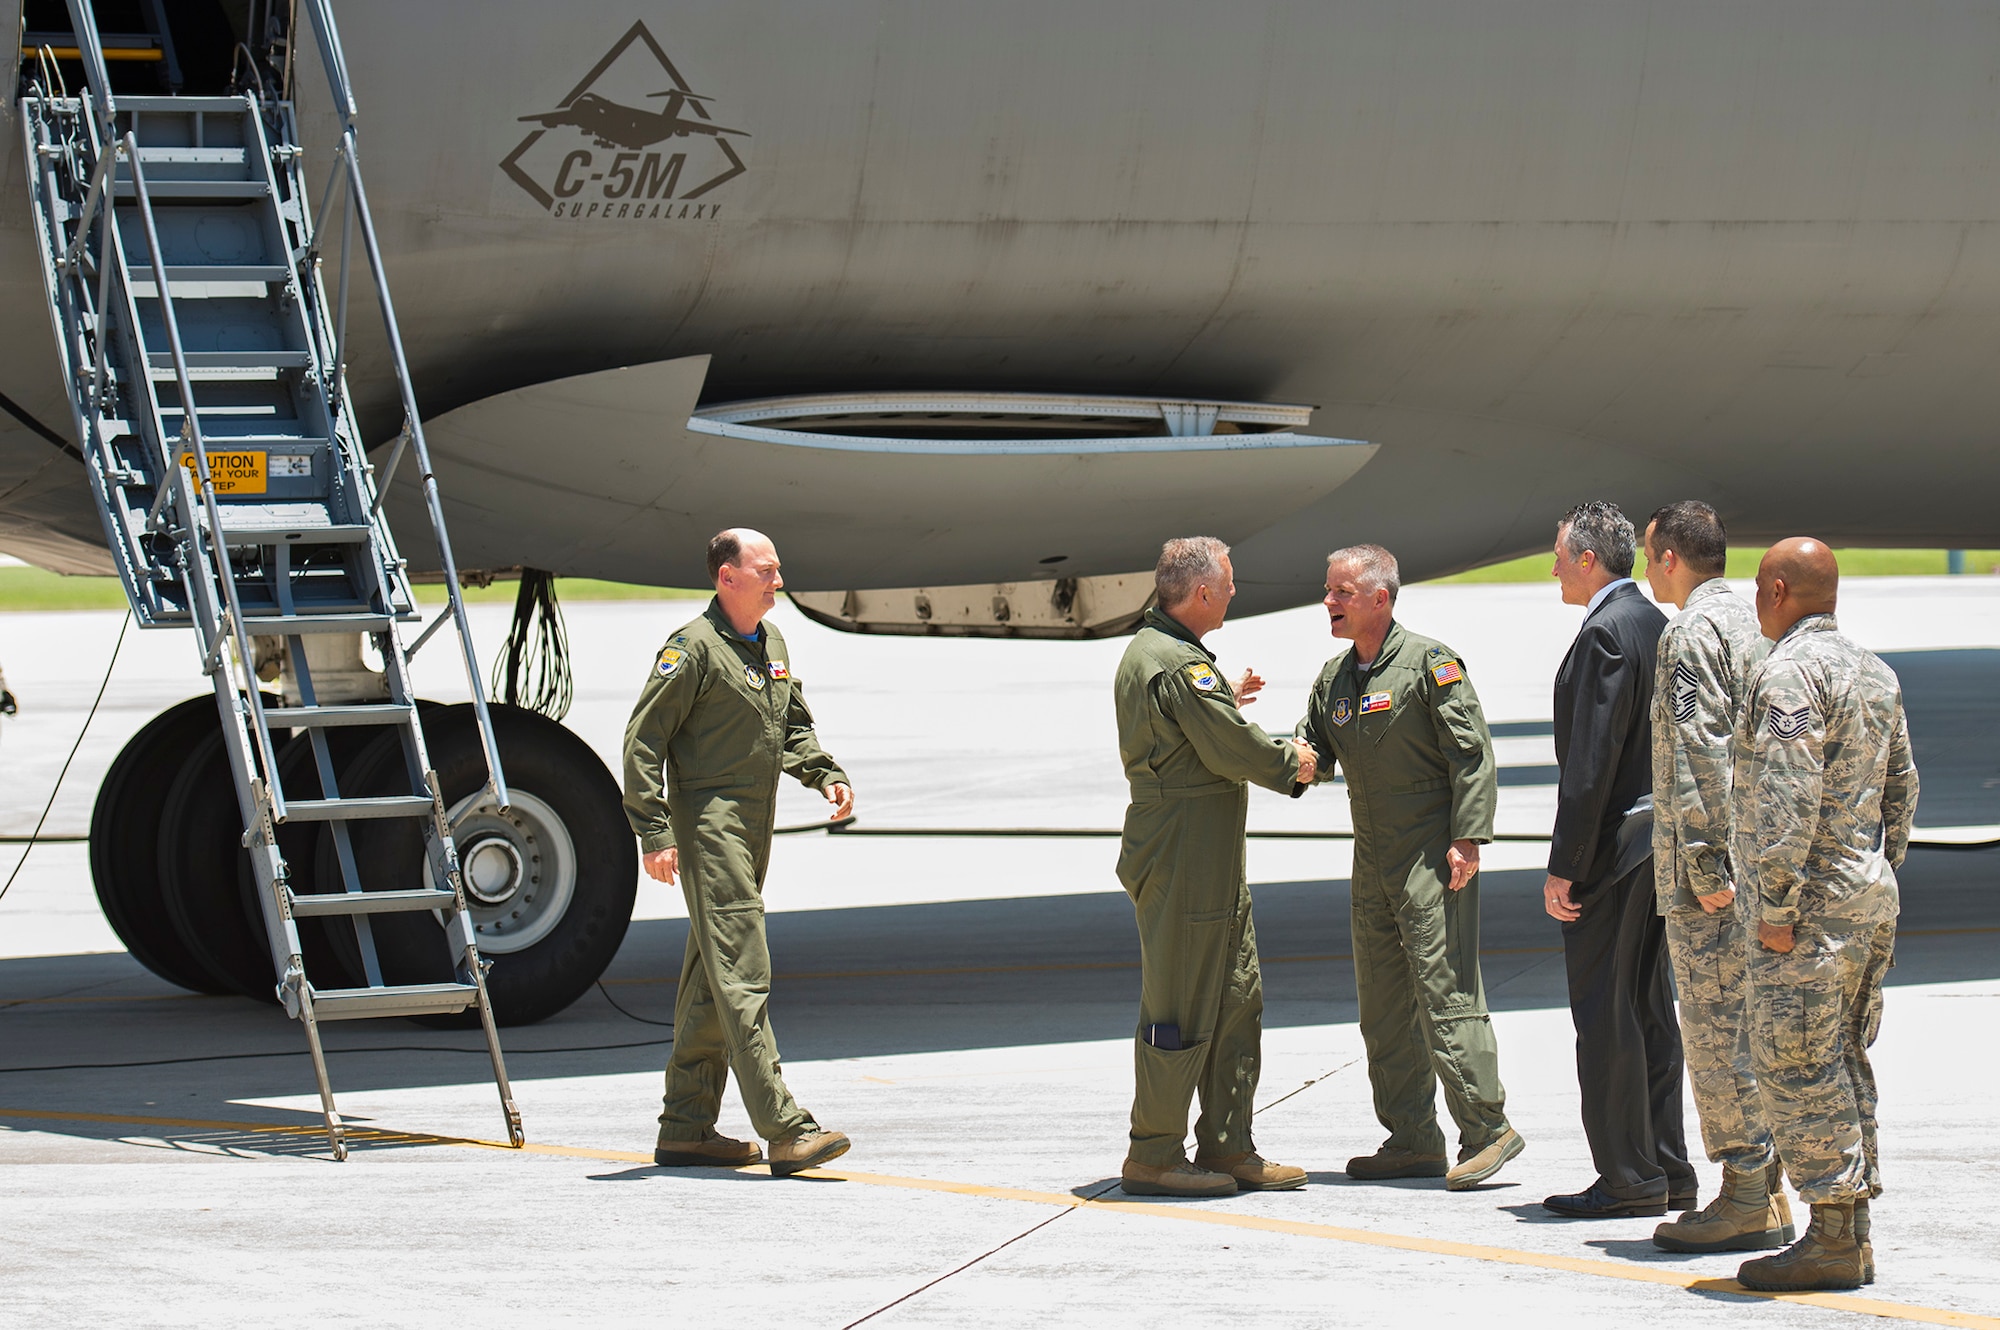 Maj. Gen. John Flournoy, 4th Air Force commander, shakes hands with Col. David Scott, 433rd Airlift Wing vice commander, after departing the Alamo Wing's first C-5M Super Galaxy, bestowed "The City of San Antonio" June 17, 2016 at Joint Base San Antonio-Lackland, Texas. In total, the 433rd AW will receive nine C-5M models by late 2018, which is the result of a two-phase modernization effort that will improve fuel savings, climb rate, payload capability, and noise reduction.  (U.S. Air Force photo by Benjamin Faske) 